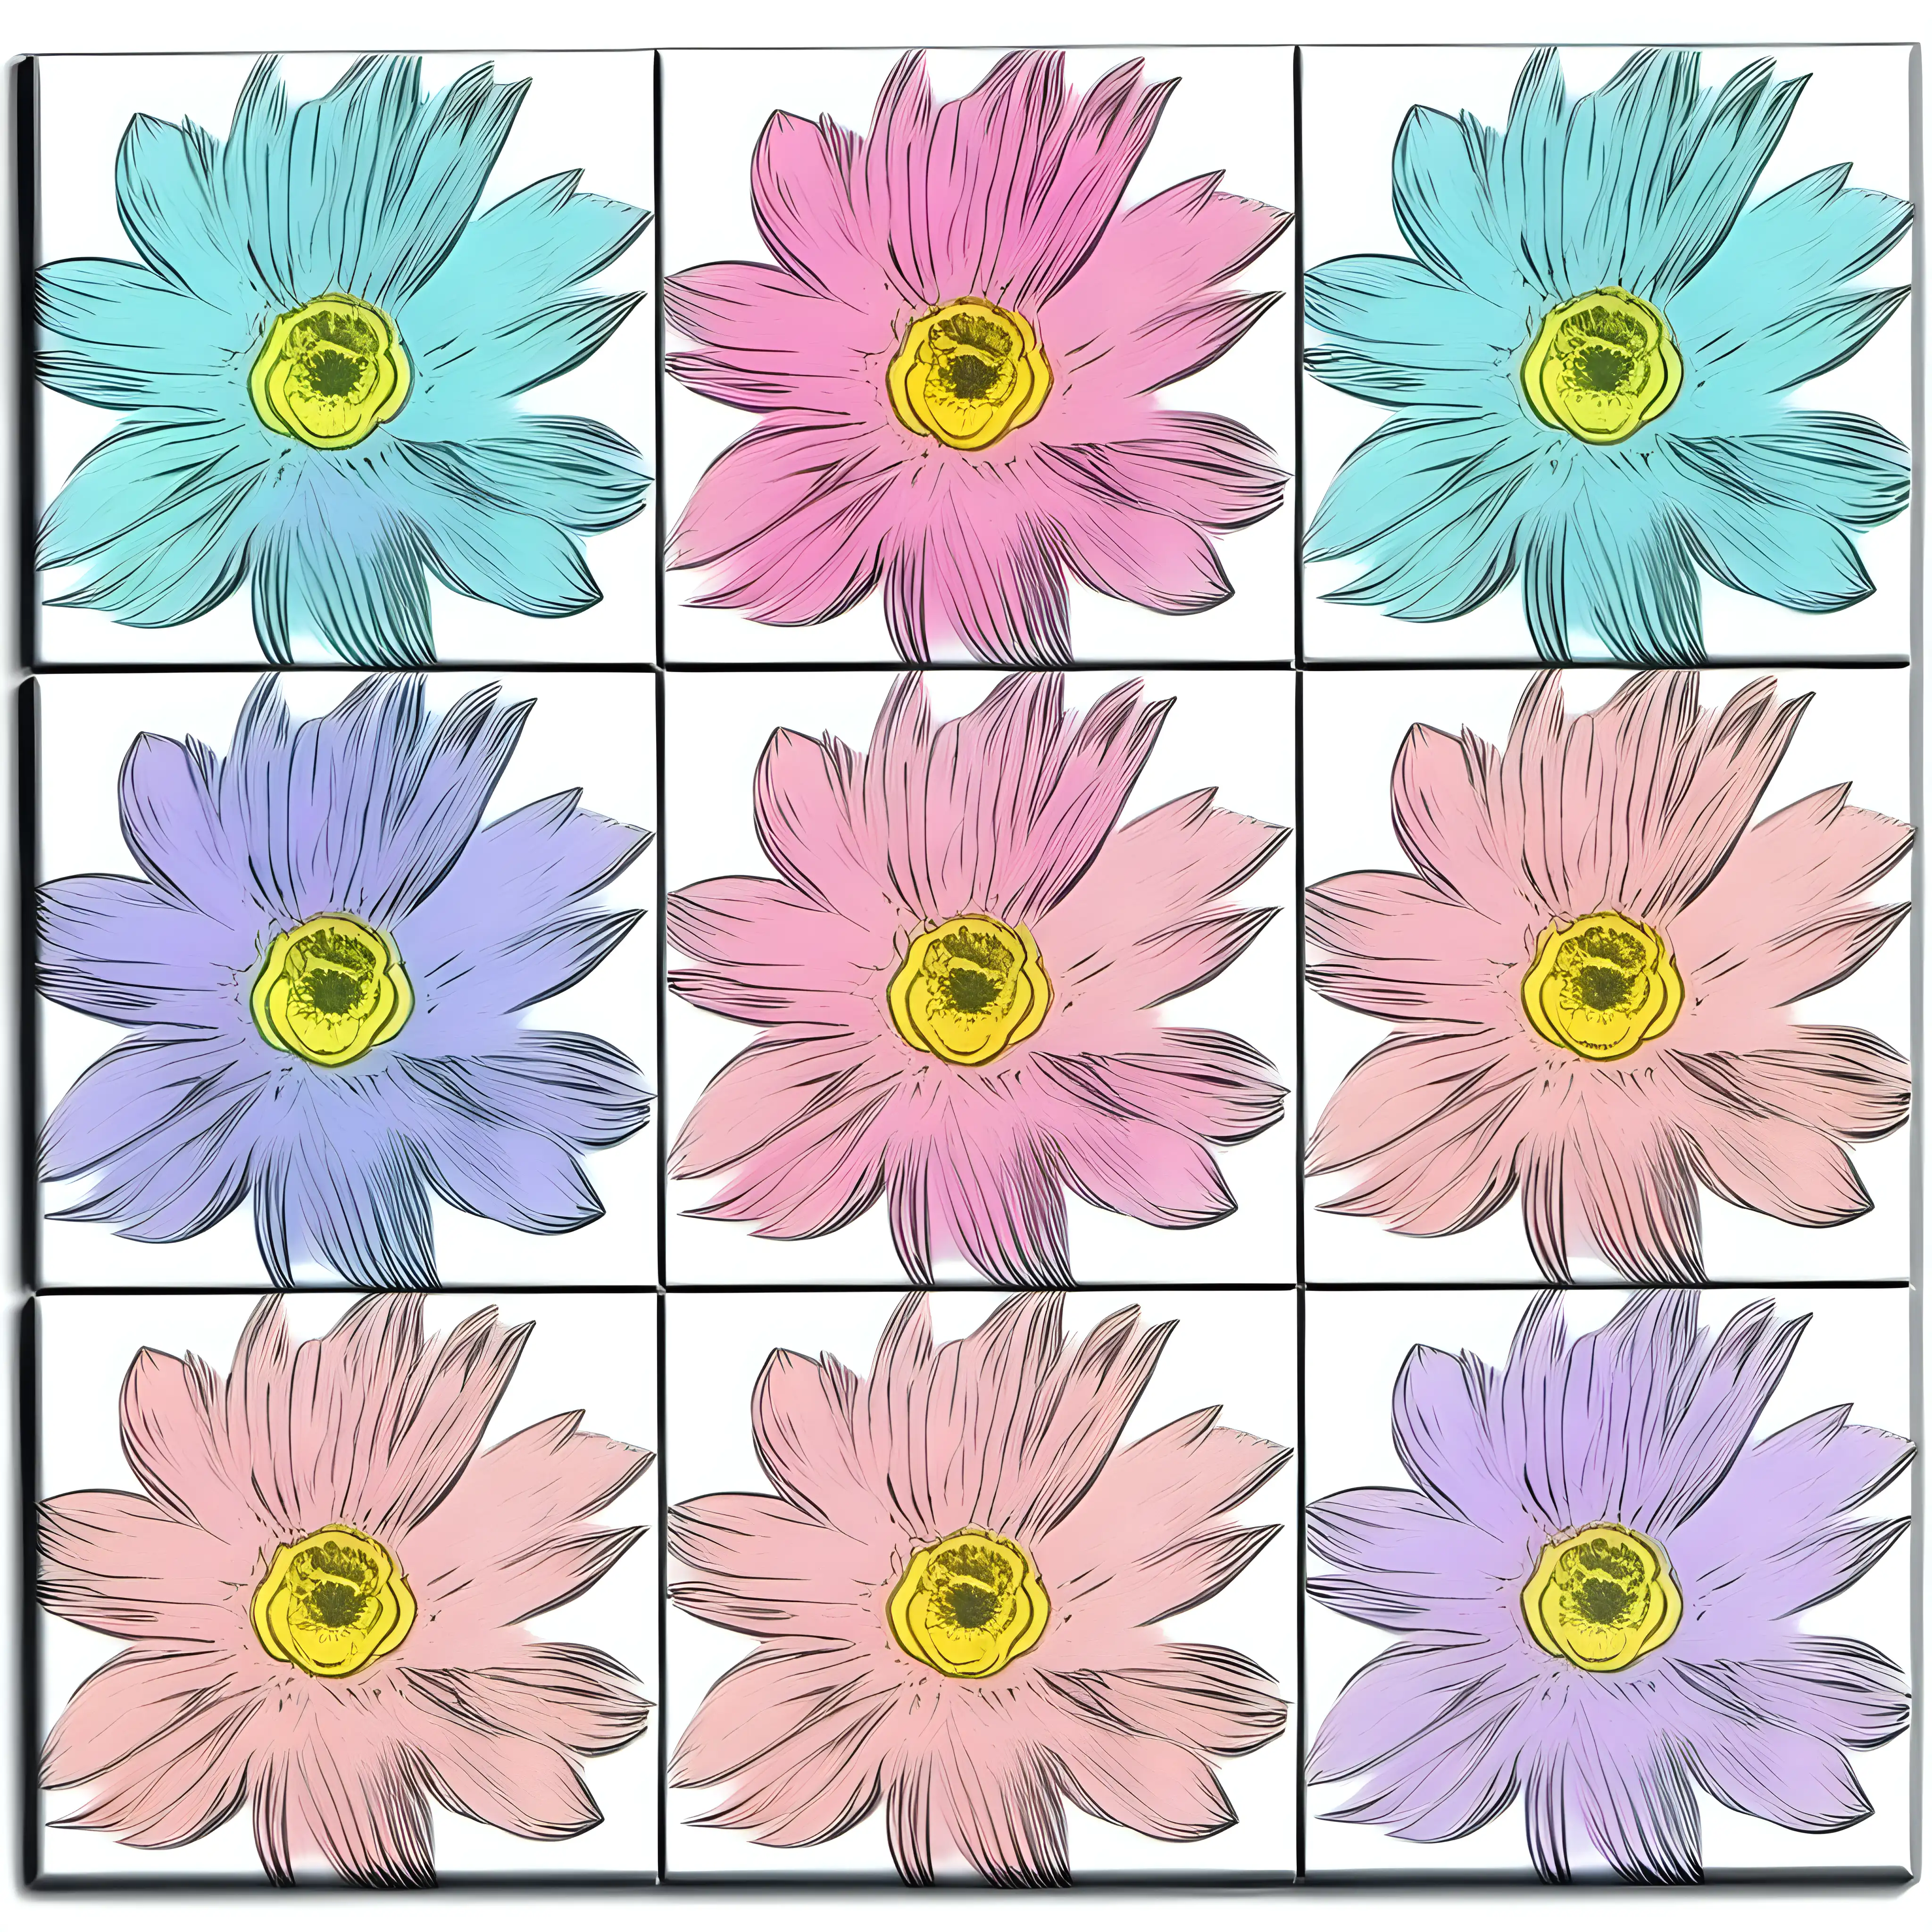 SouthernInspired Pastel Watercolor Flower Clipart on White Background Andy Warhol Inspired Tile